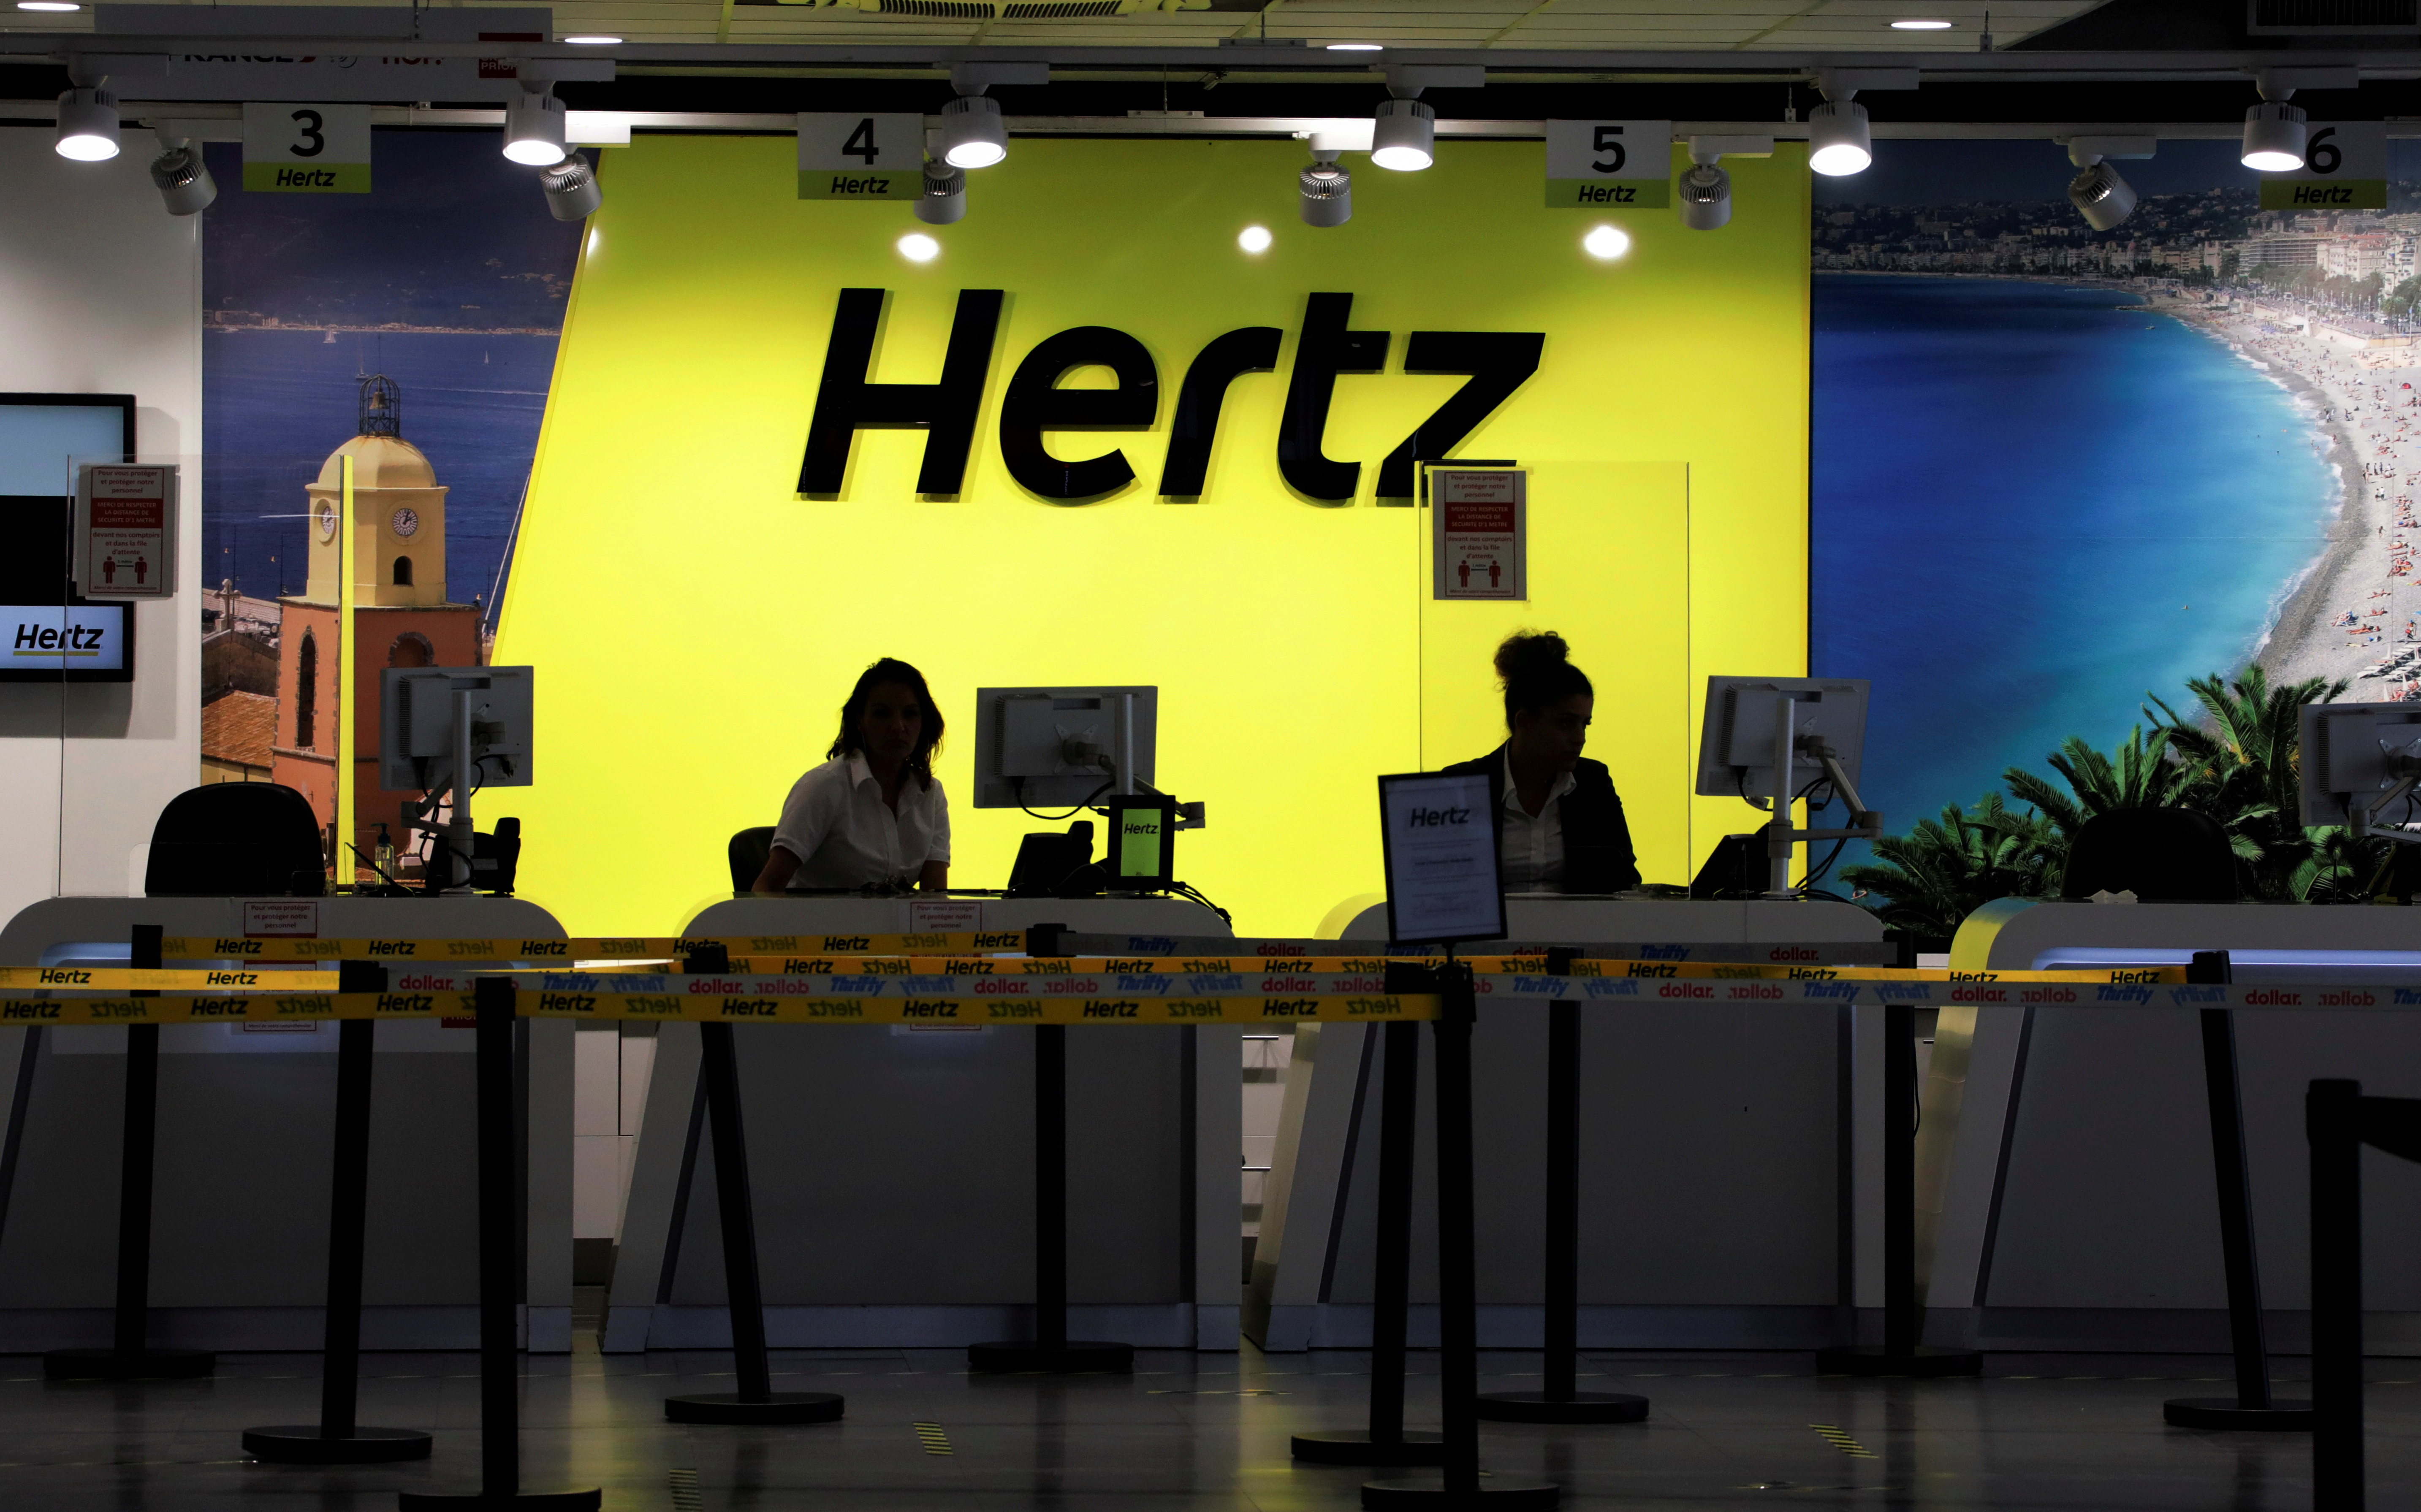 The desk of car rental company Hertz is seen at Nice International airport in Nice, France, May 27, 2020. REUTERS/Eric Gaillard/File Photo